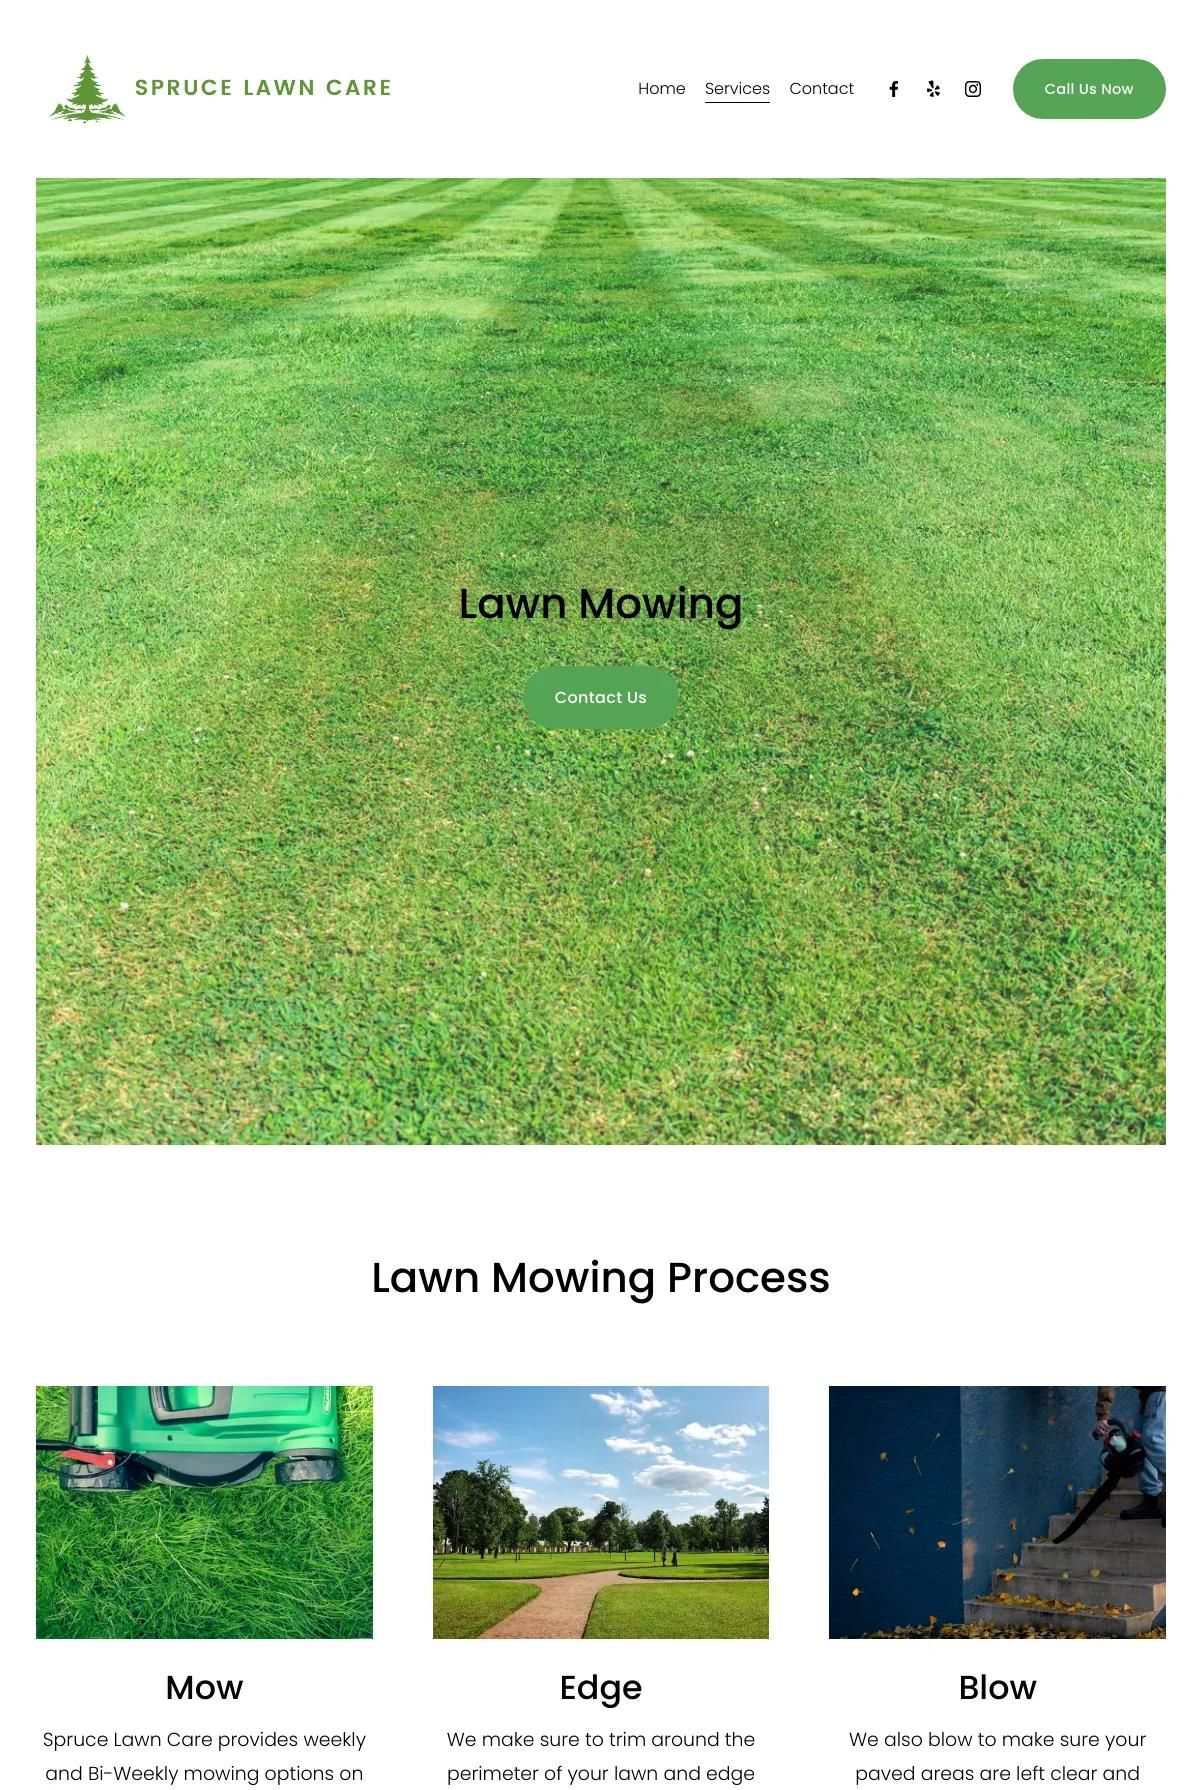 Screenshot 2 of Spruce Lawn Care (Example Squarespace Lawn Care Website)